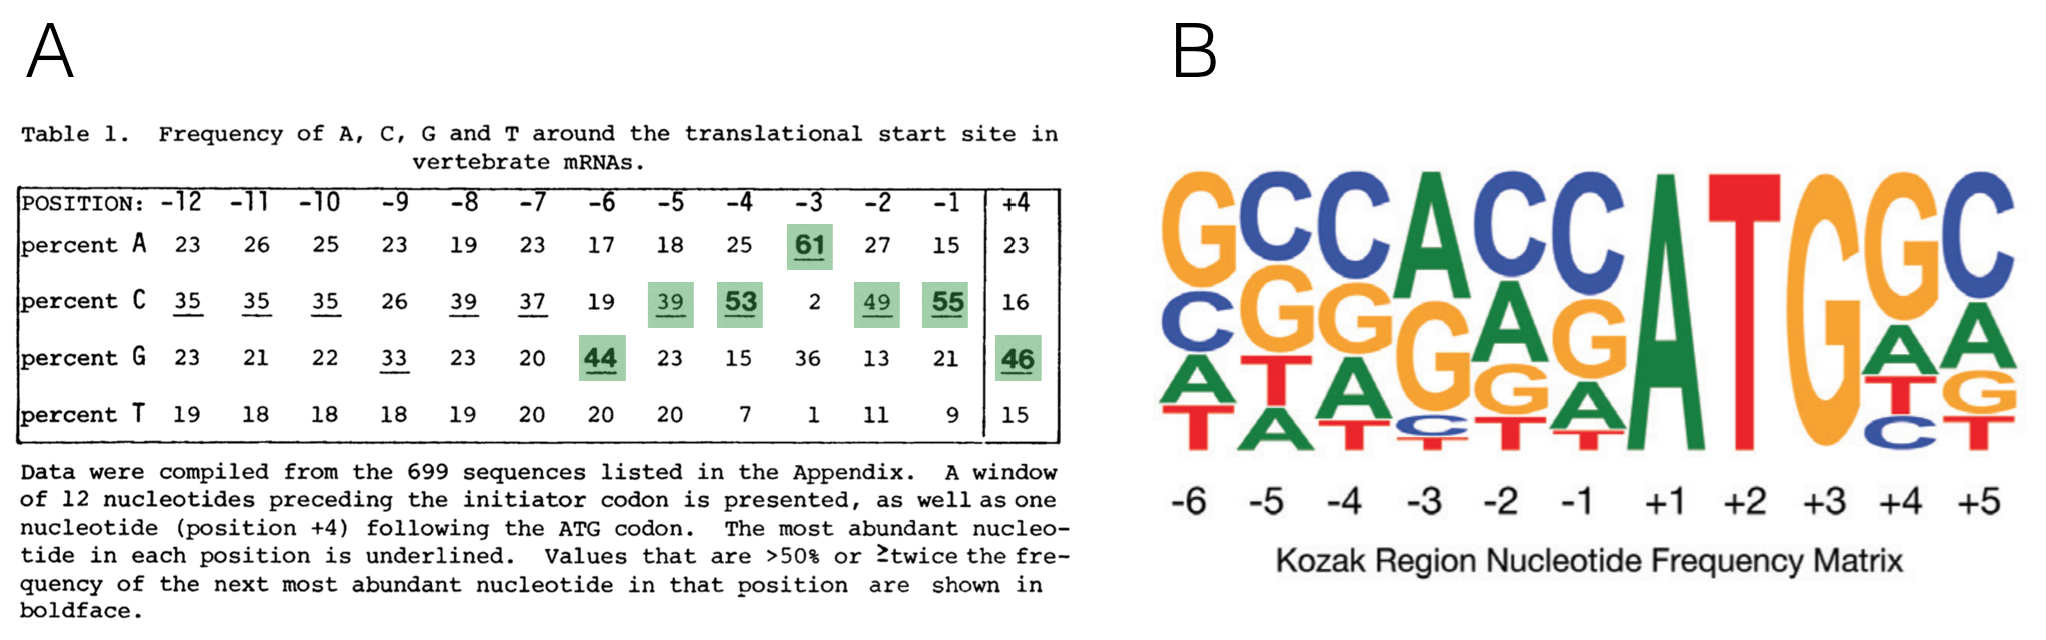 A) A multiple sequence alignment of 699 vertebrate genes displayed as a nucleotide frequency table (The ATG is not included since it is invariant). This schematic is from Kozak, 1987 with the most frequently observed nucleotides at positions -6 to +4 highlighted in green. B) This sequence logo was created 28 yeats later from the complete set of human protein coding genes. Notice the similarities!